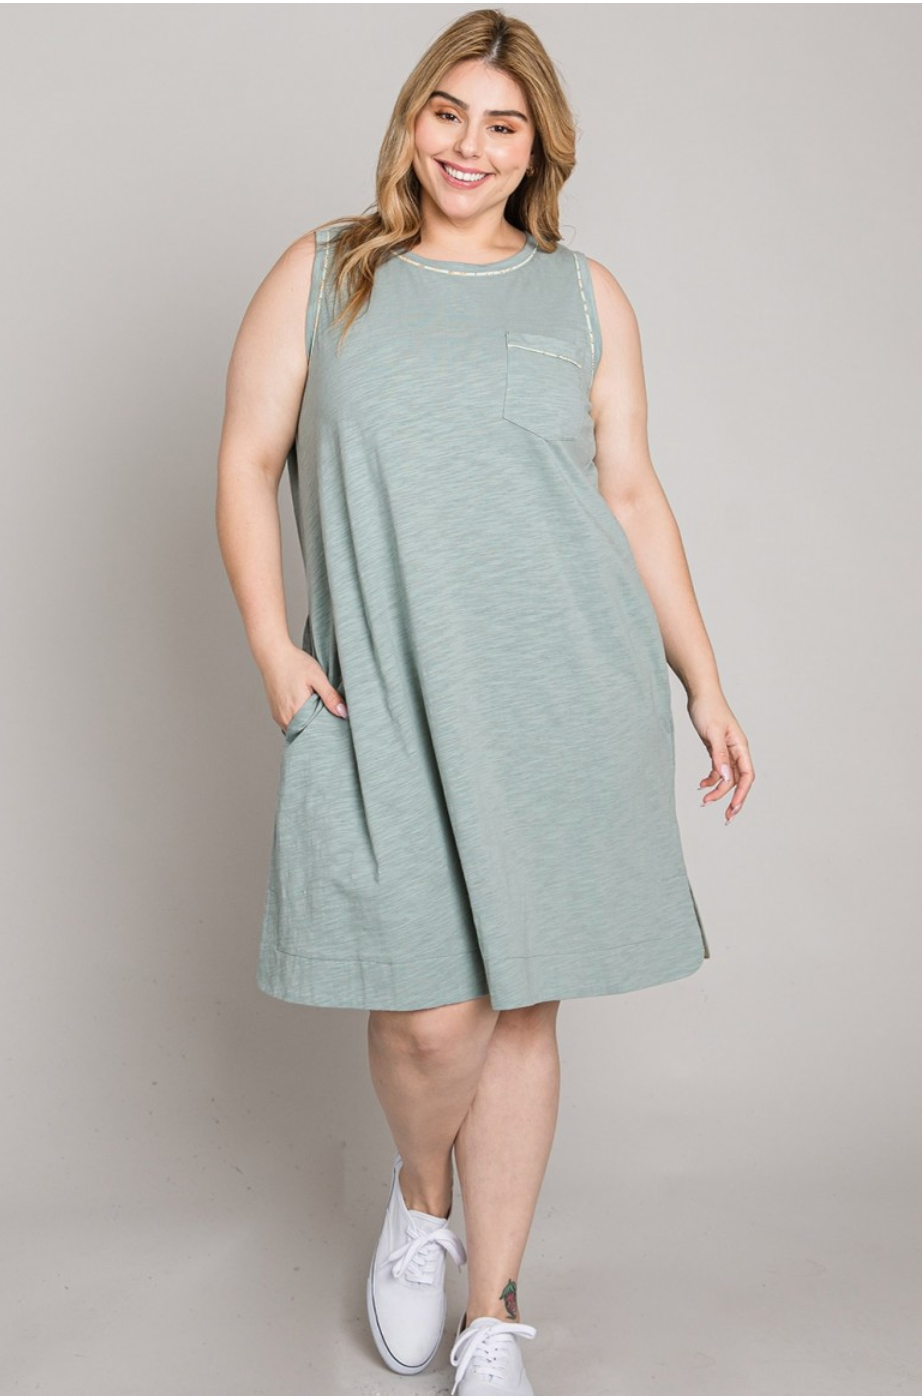 See You Every Time Tank Dress - Mint